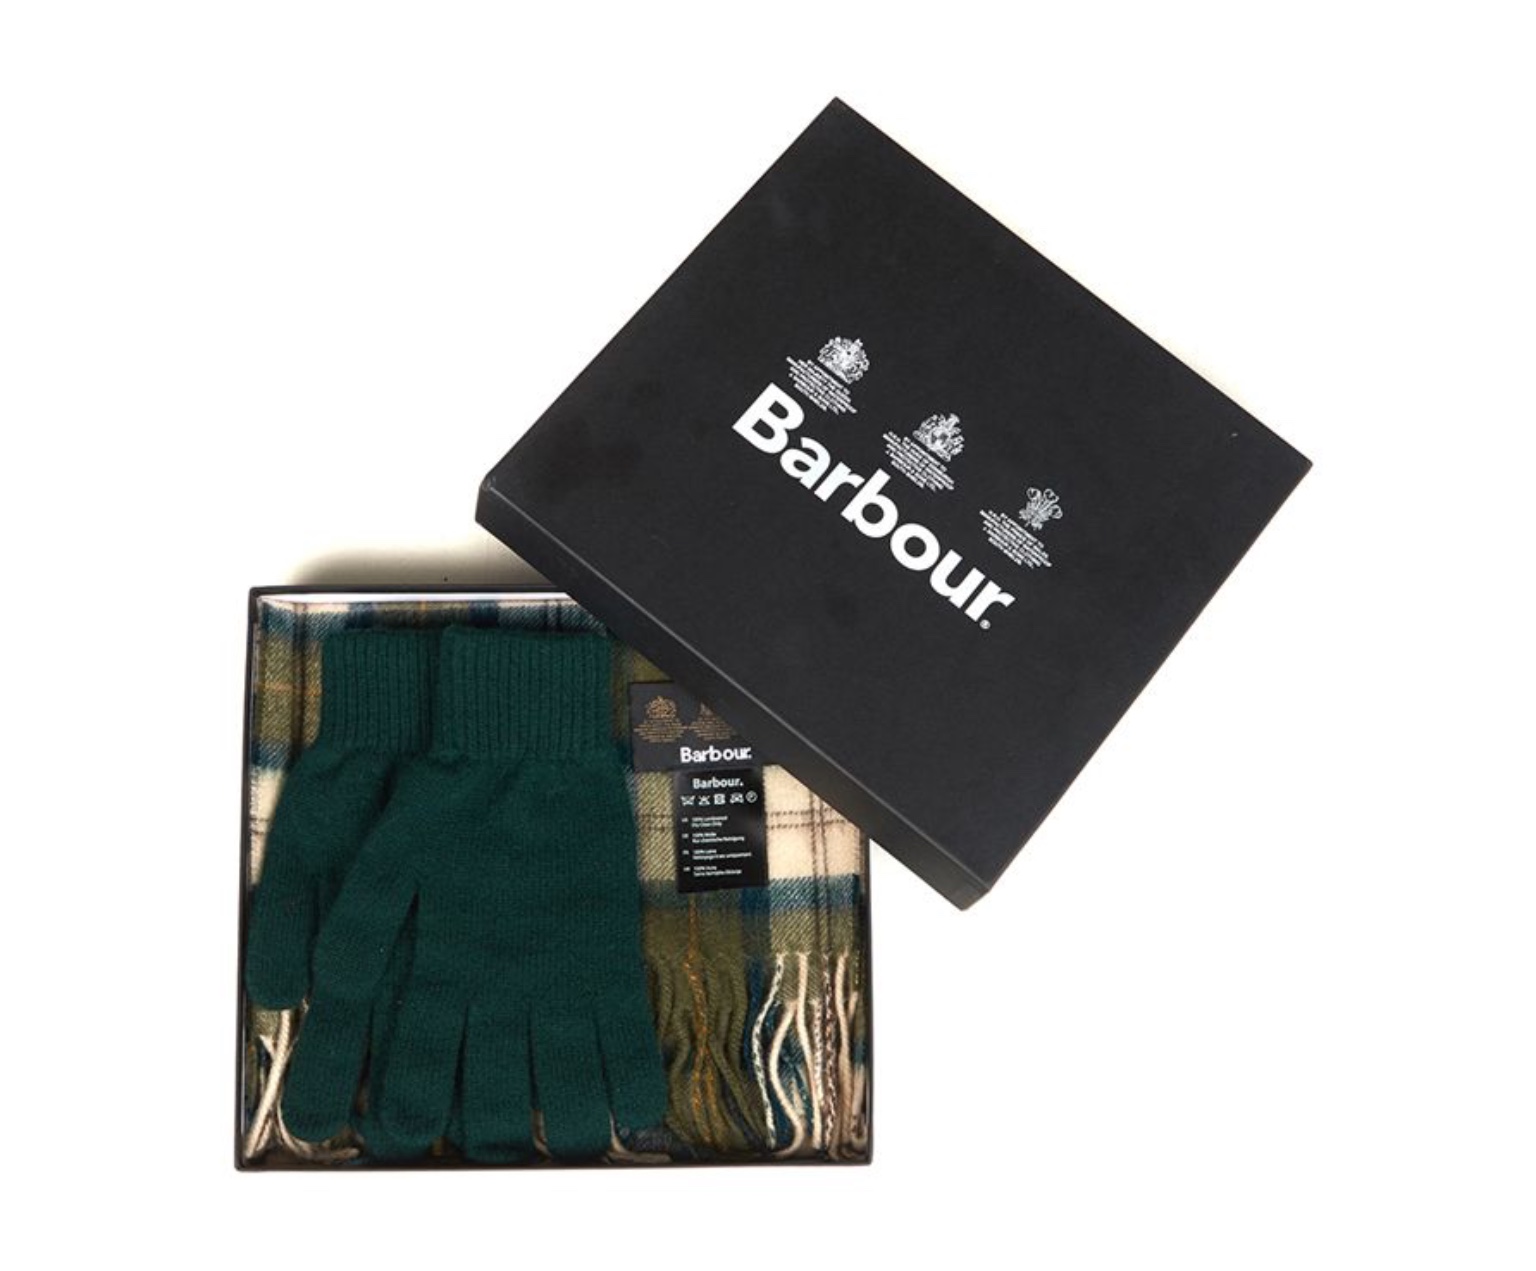 Barbour Scarf and Glove Gift Box